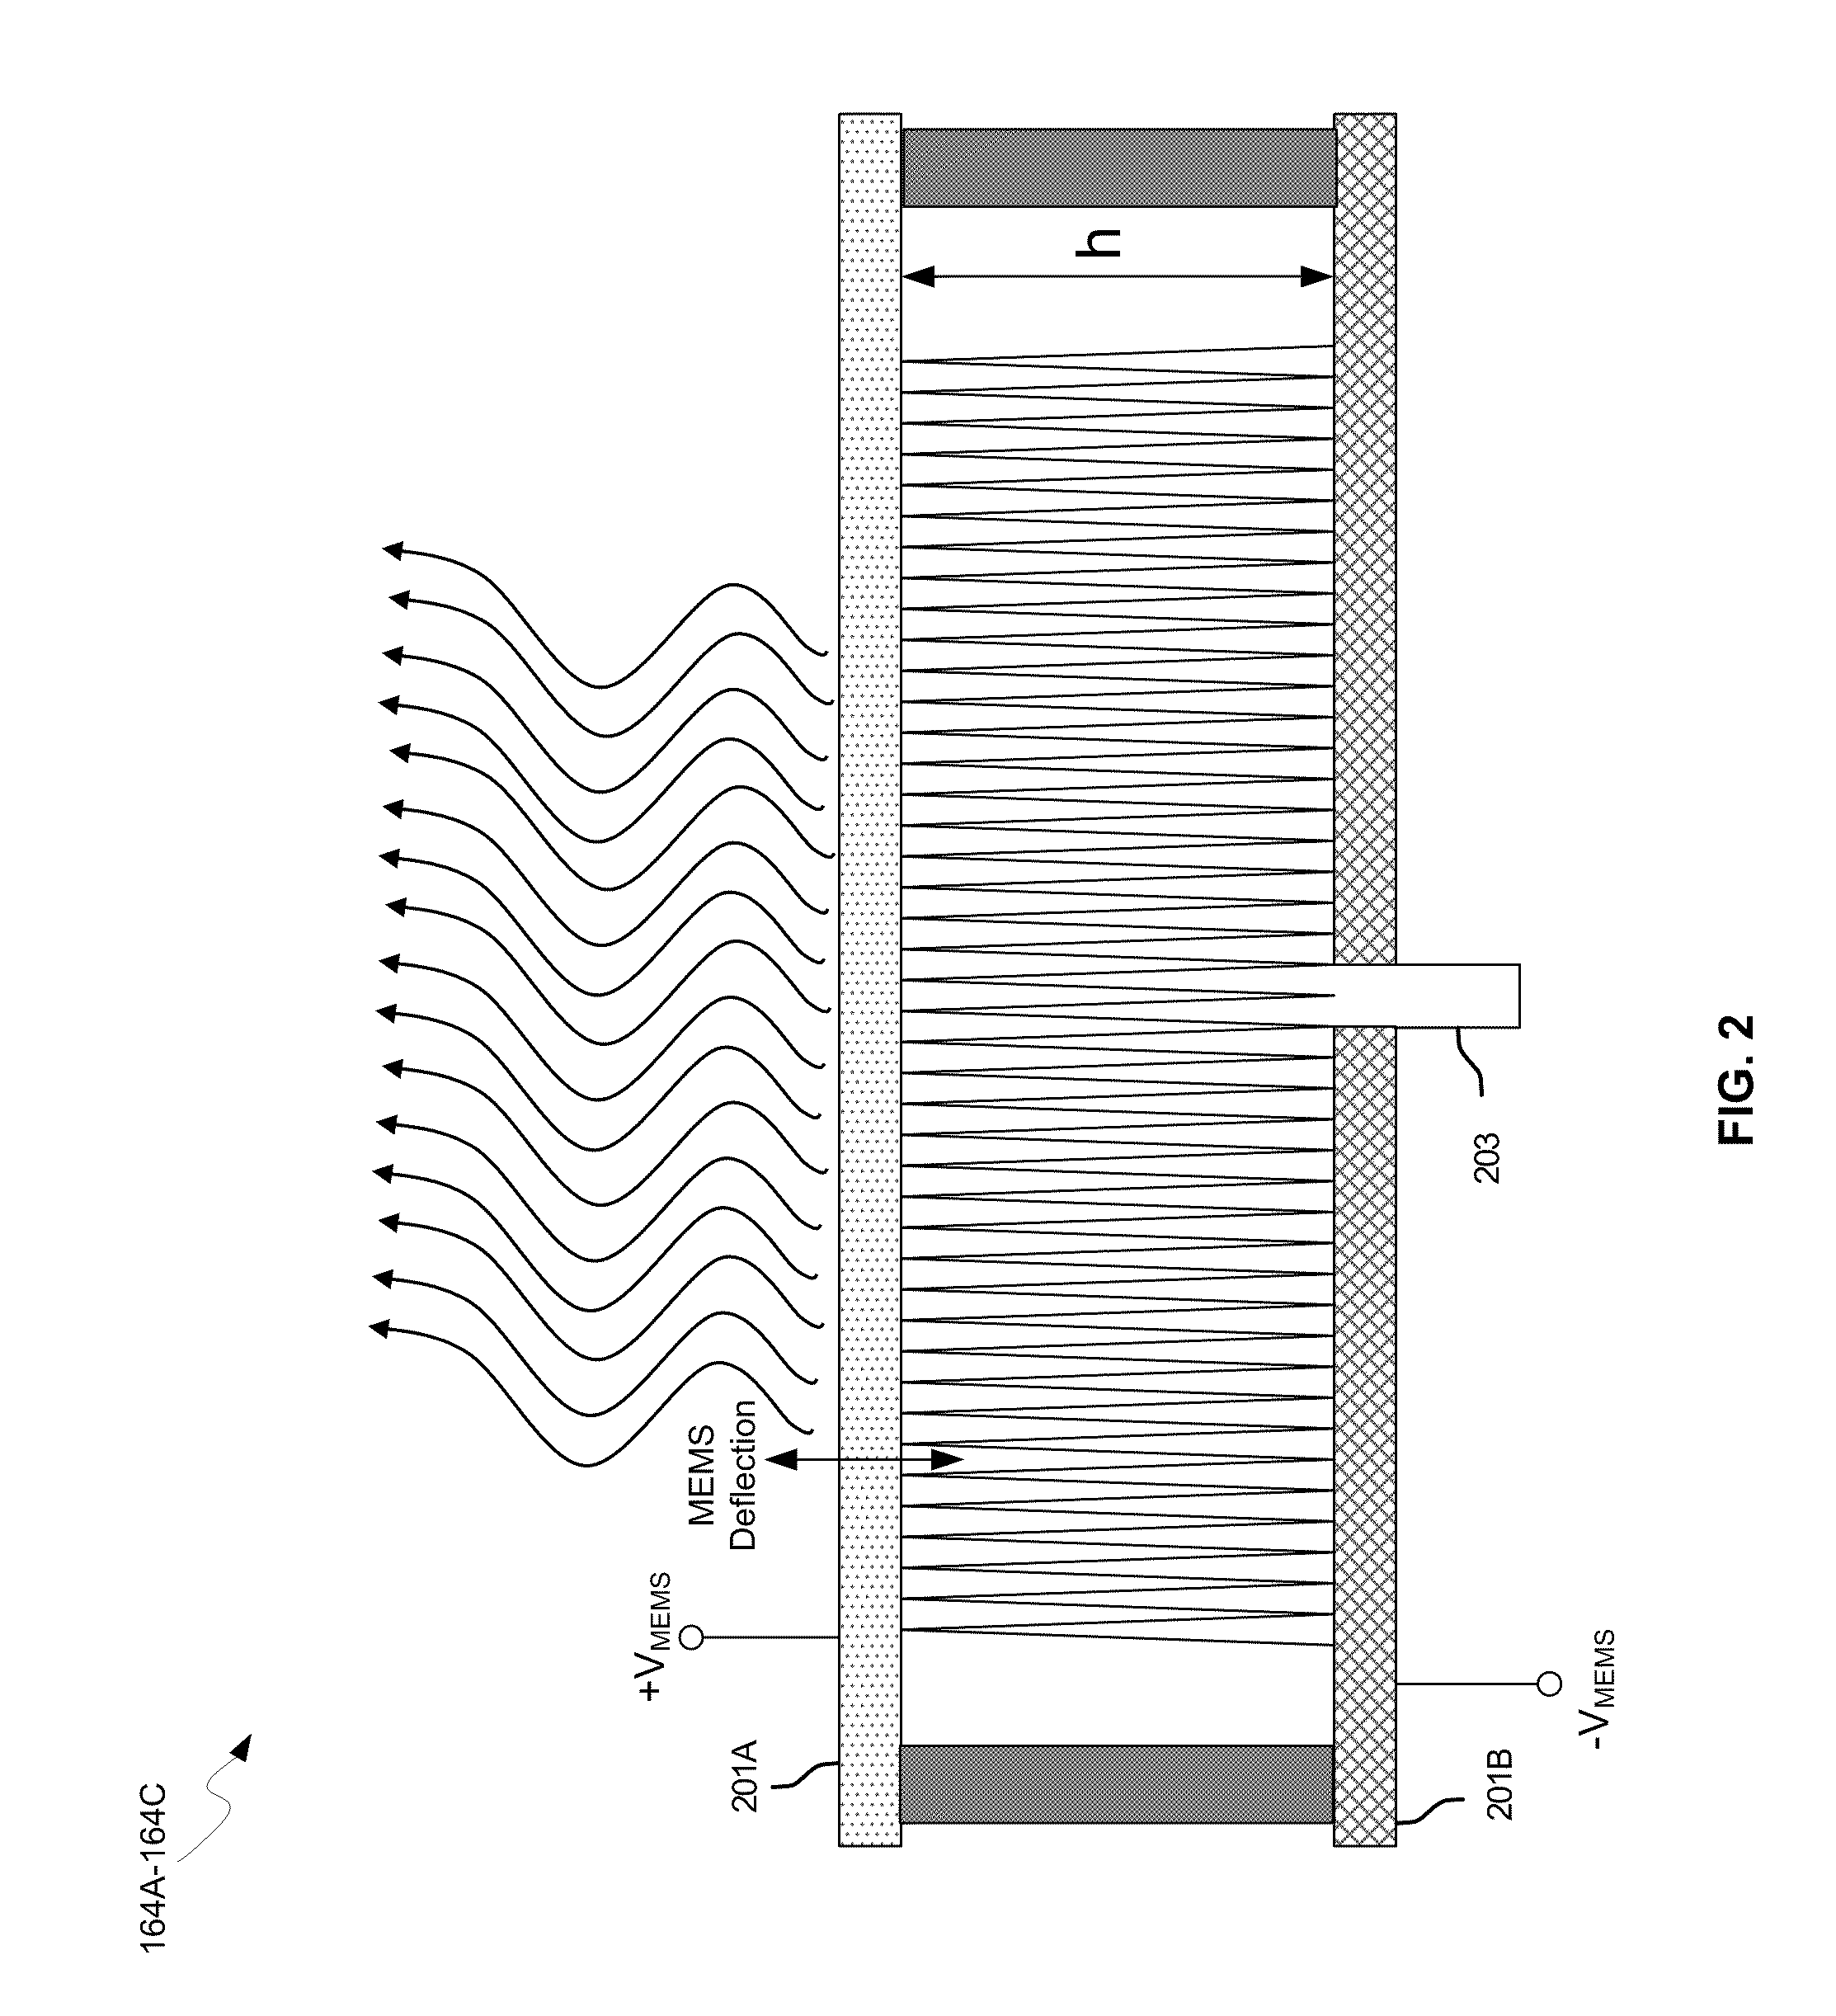 Method and system for power transfer utilizing leaky wave antennas